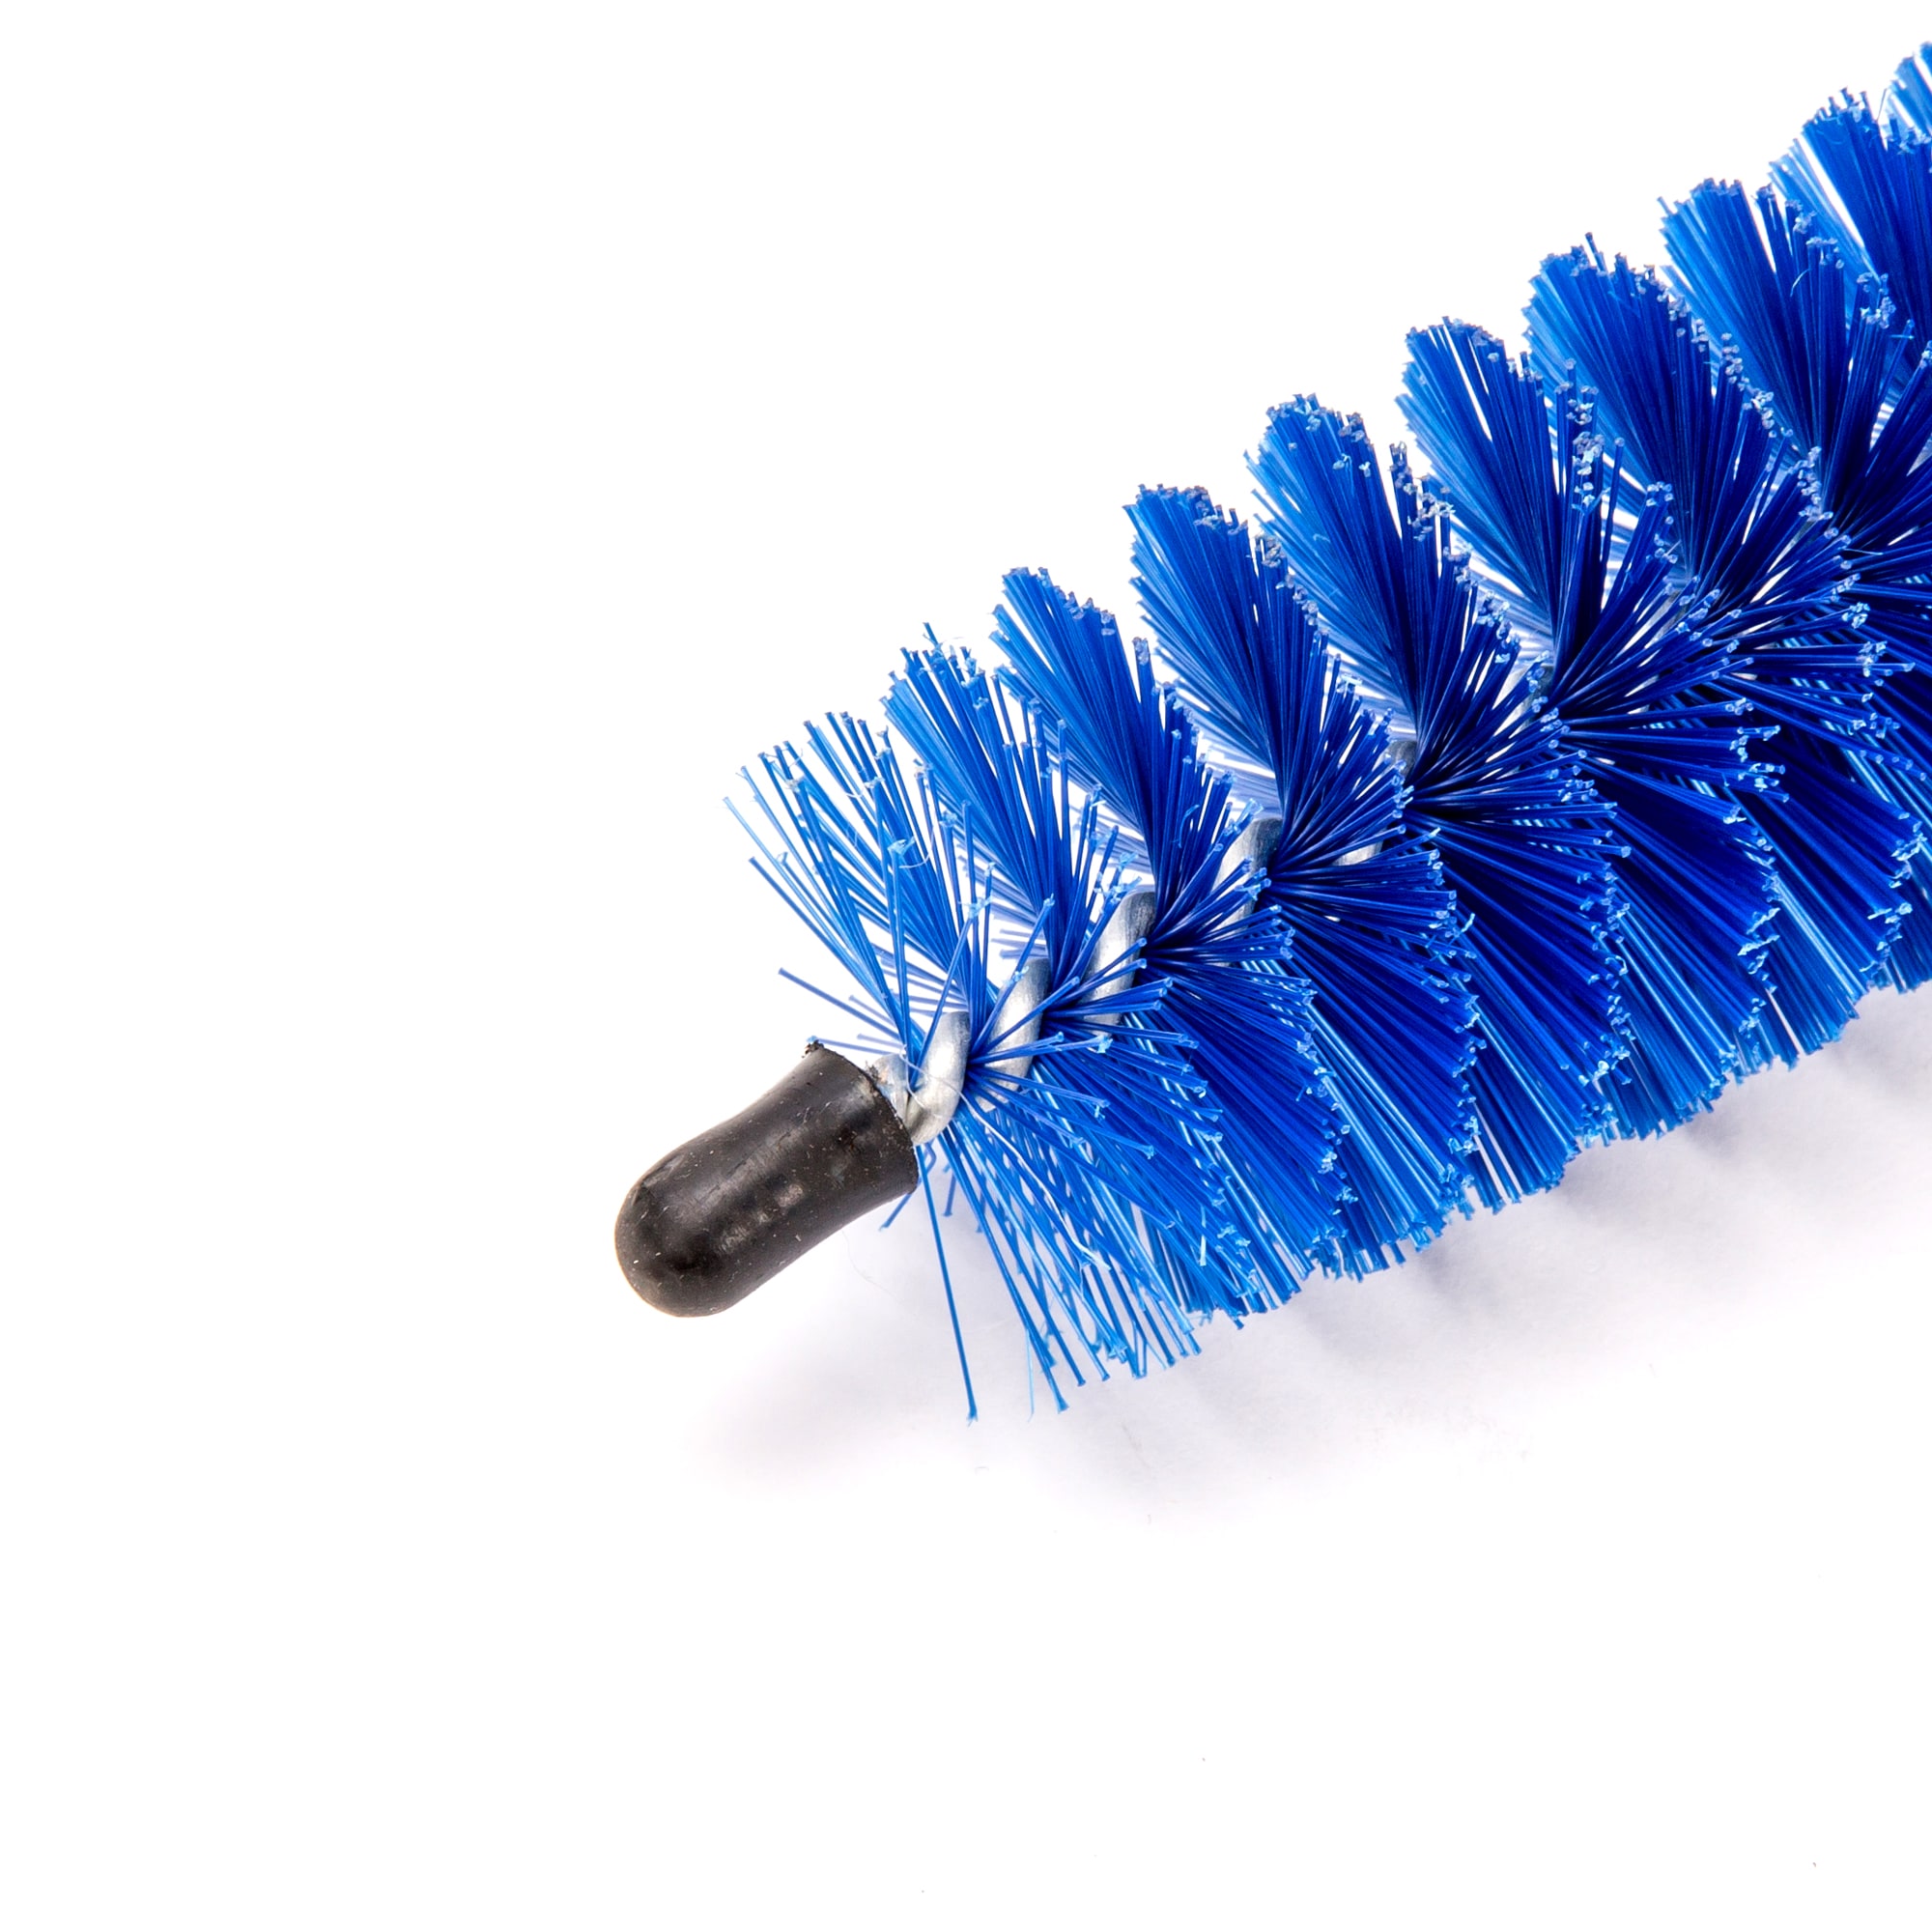 Quickie Home Pro Refrigerator Coil Brush, 28